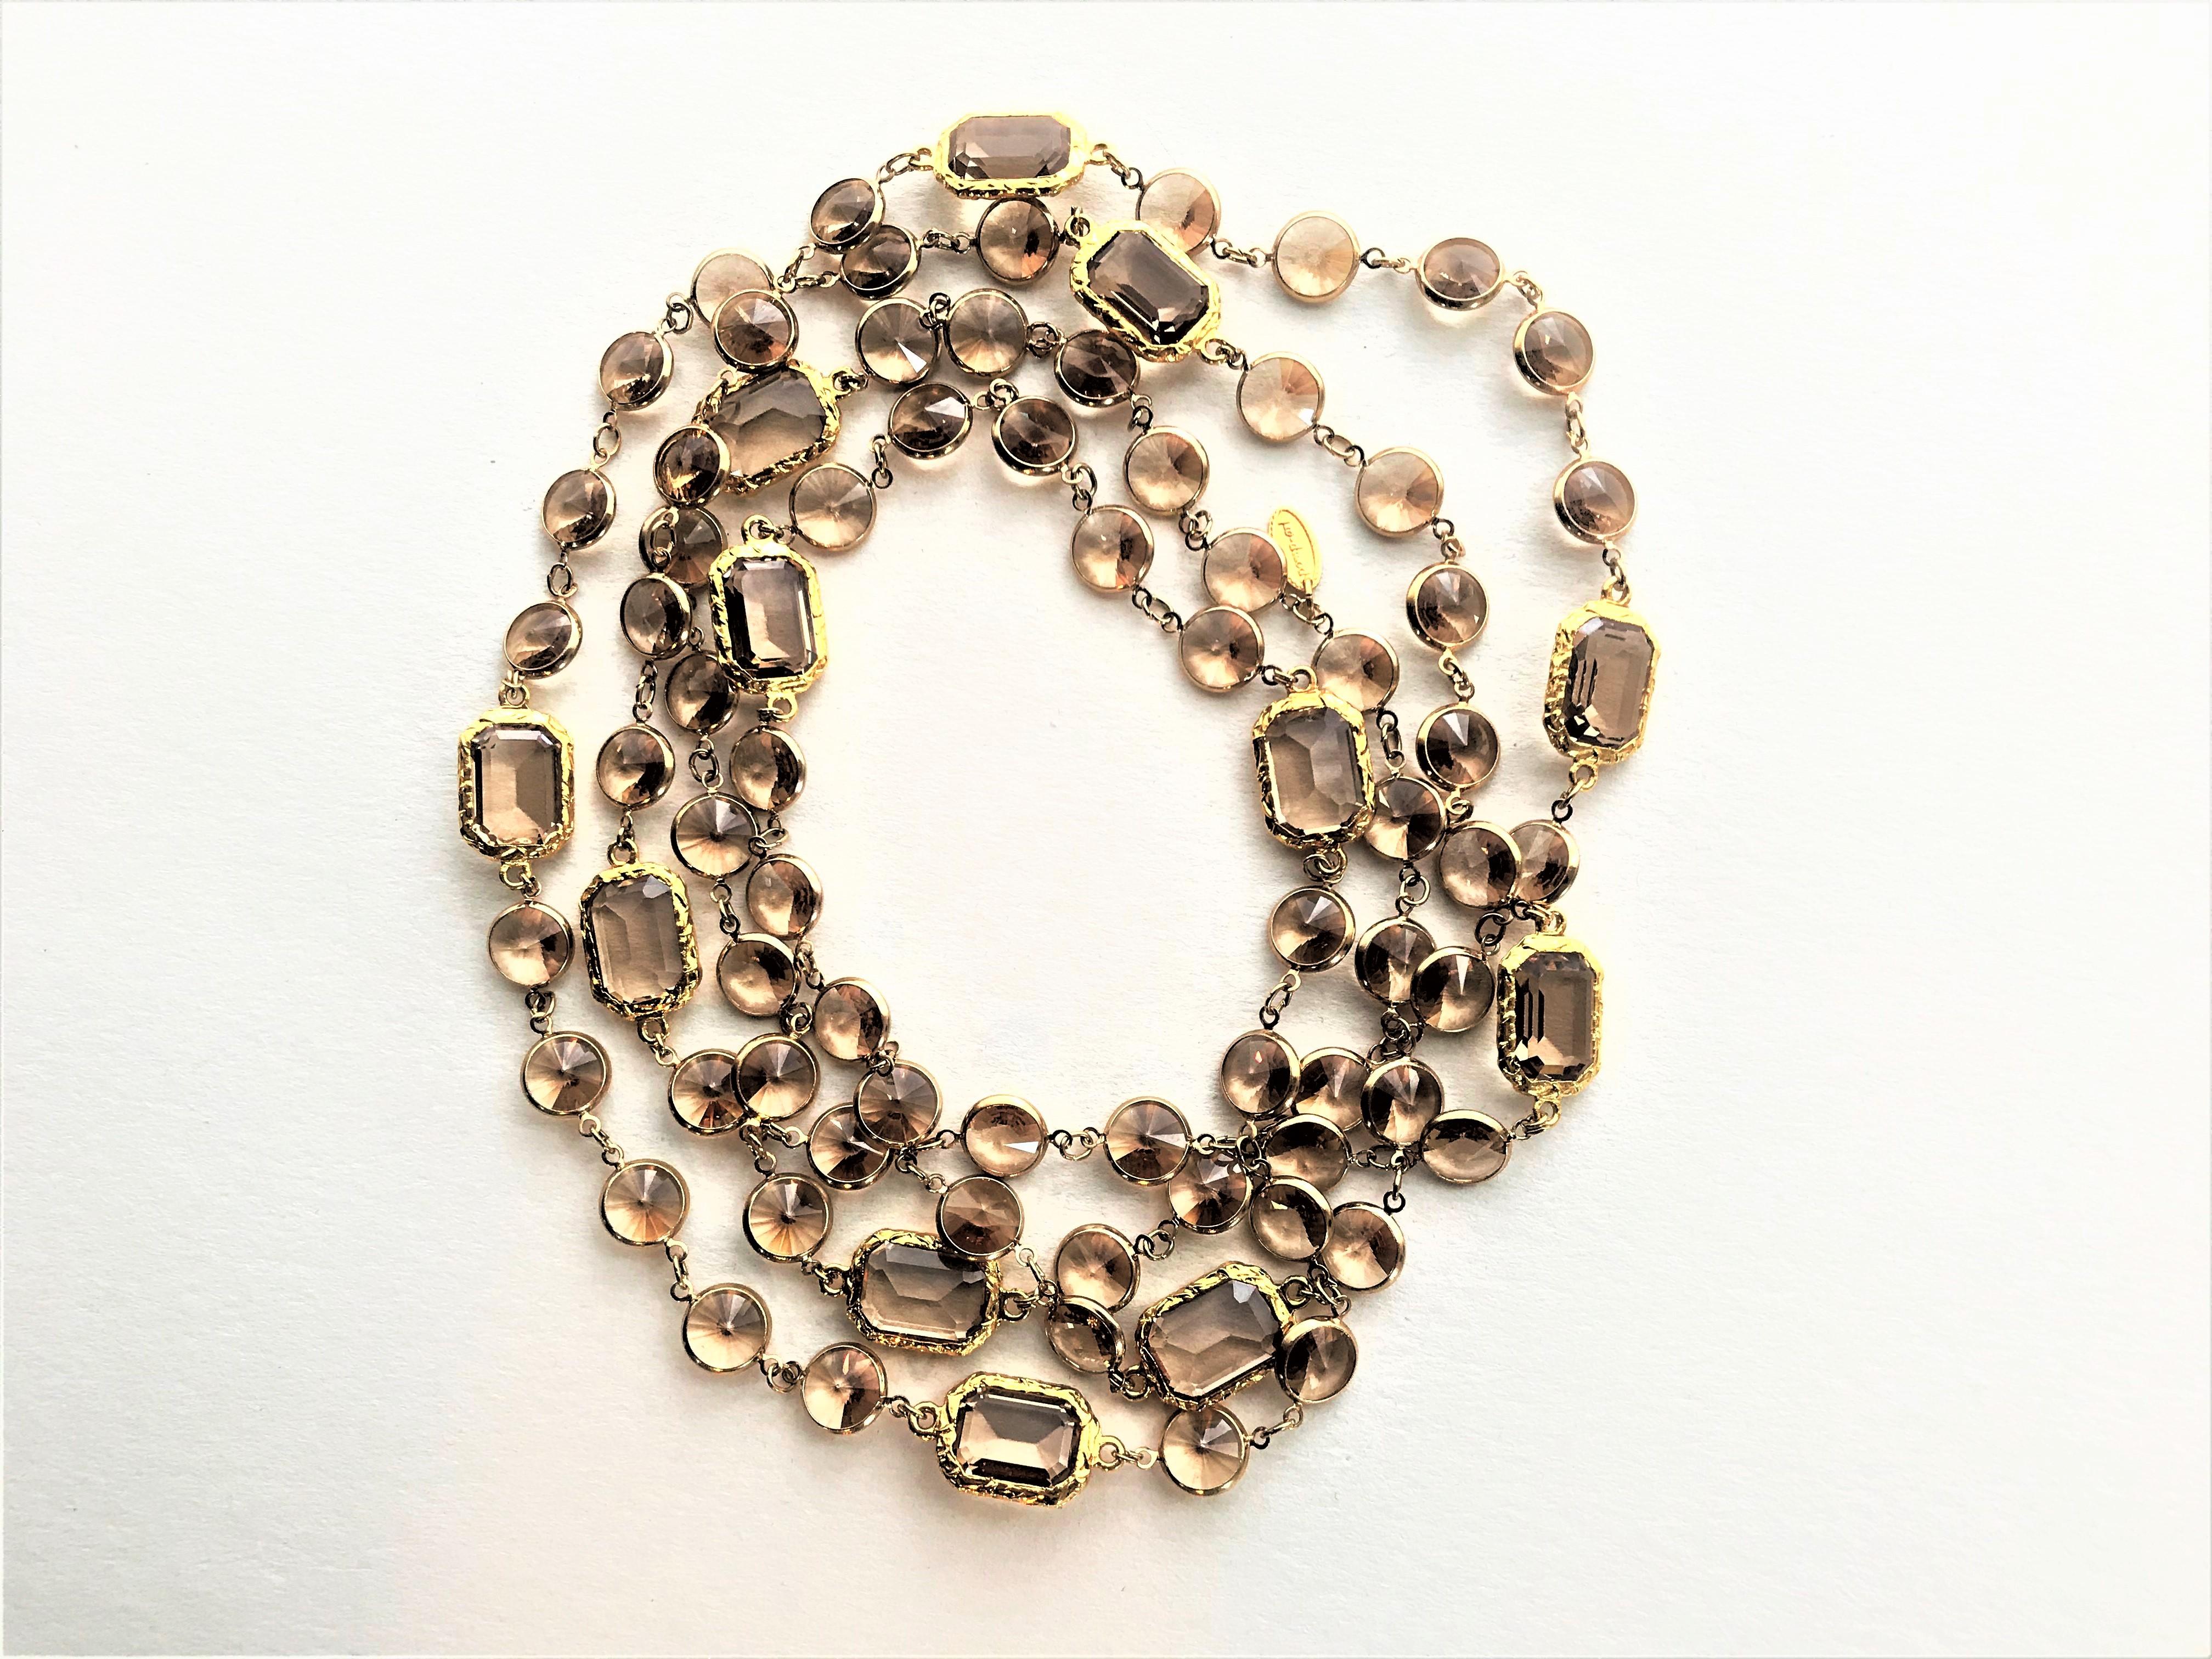 Octagon Cut New long Chicklet necklace like the Chanel, Swarovski crystals gold plated 